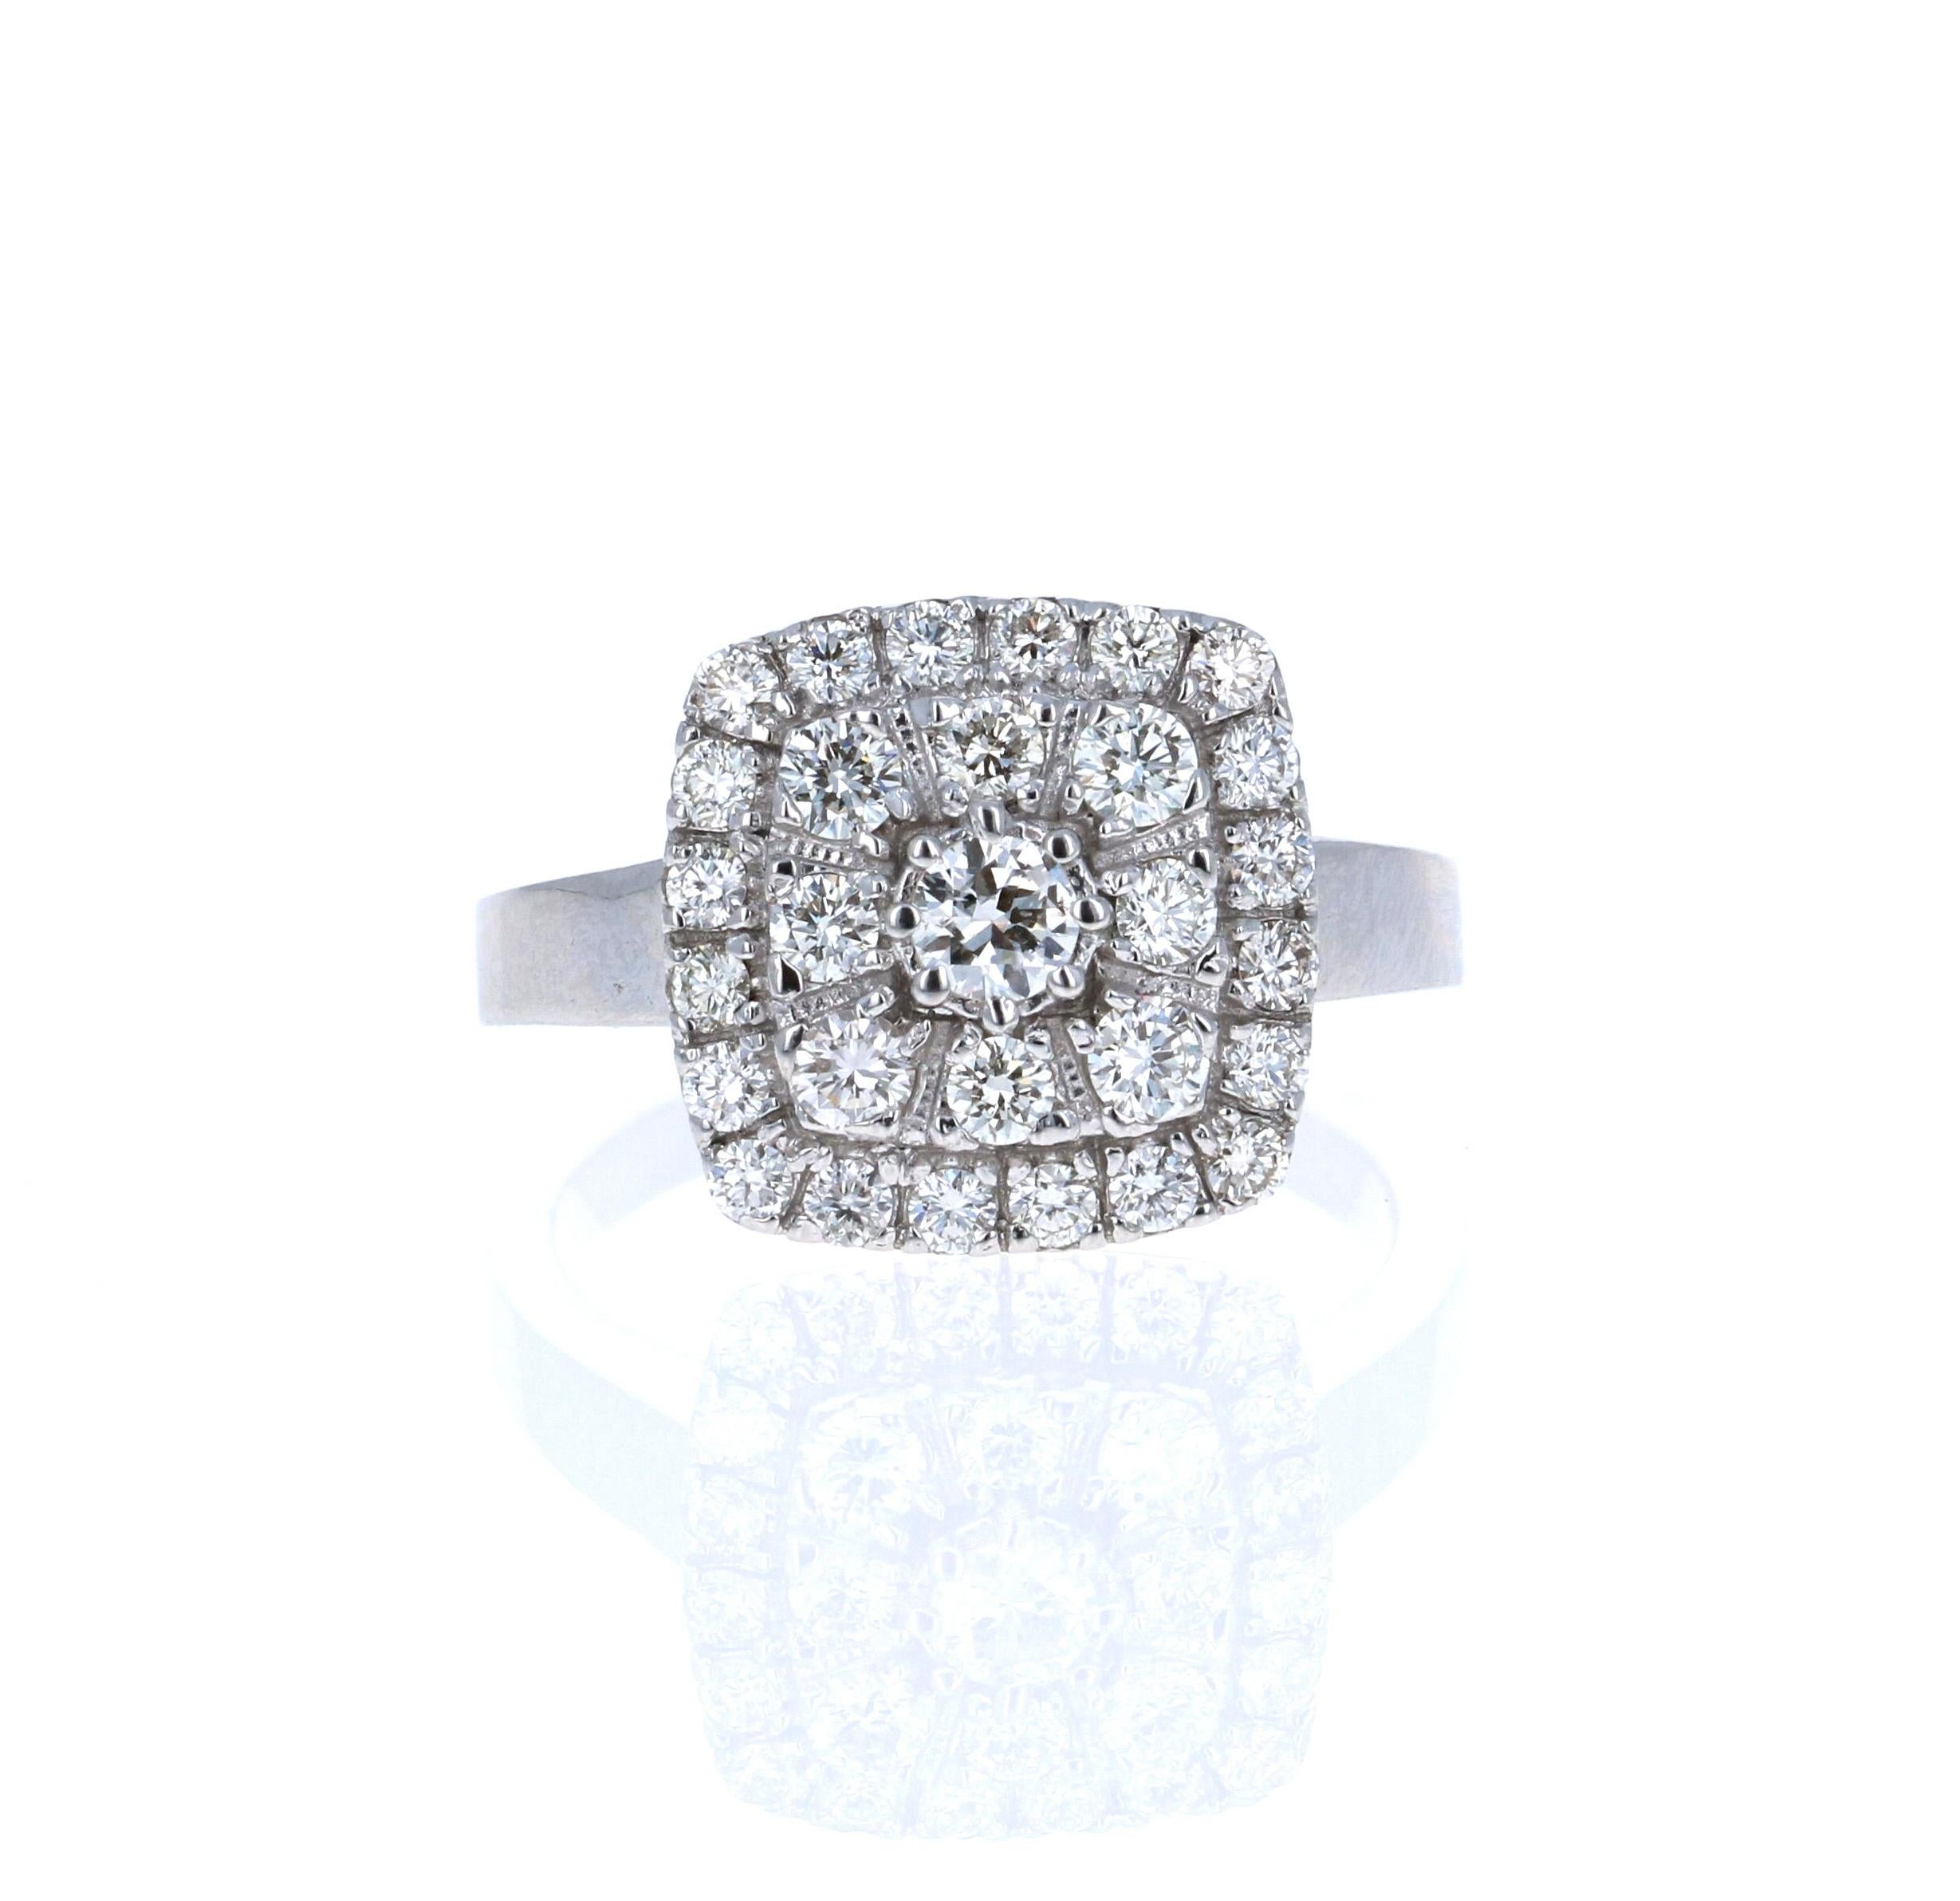 This ring has a cluster of Round Cut Brilliant Diamonds that weigh 1.14 Carats. The Clarity and Color of the Diamonds are VS-F. 

It is beautifully set in 18 Karat White Gold and weighs approximately 8.7 grams

The ring is a size 7 and can be